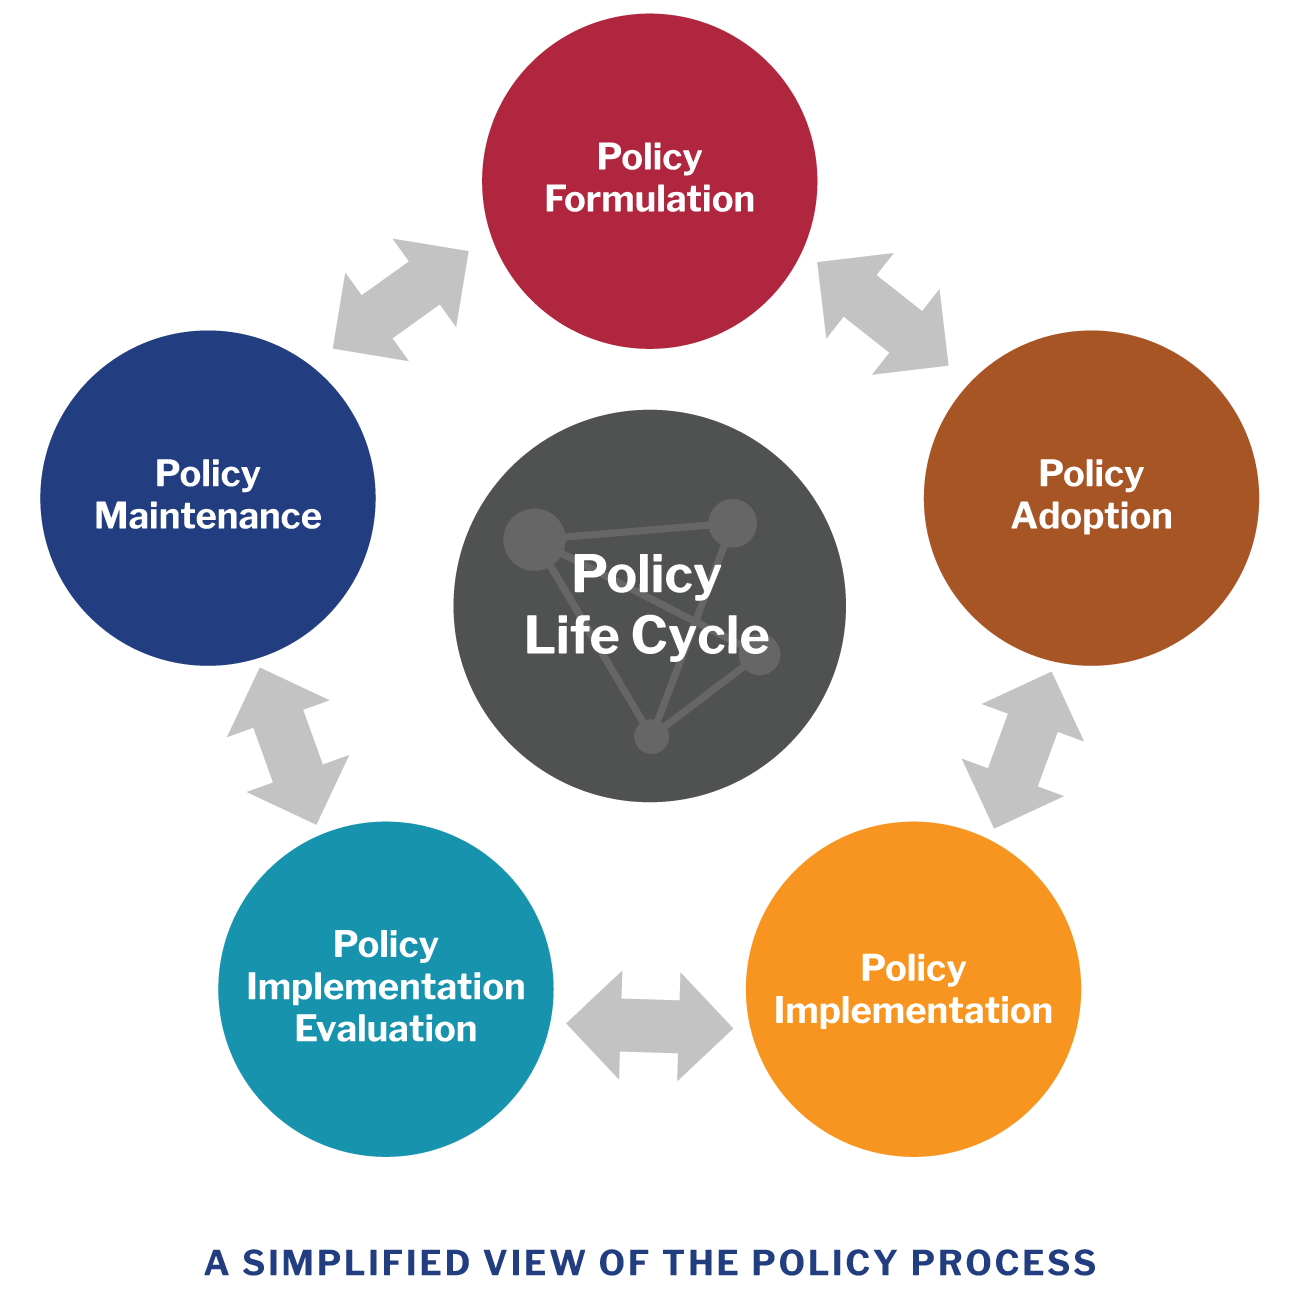 Chart showing a simplified view of the policy life cycle.